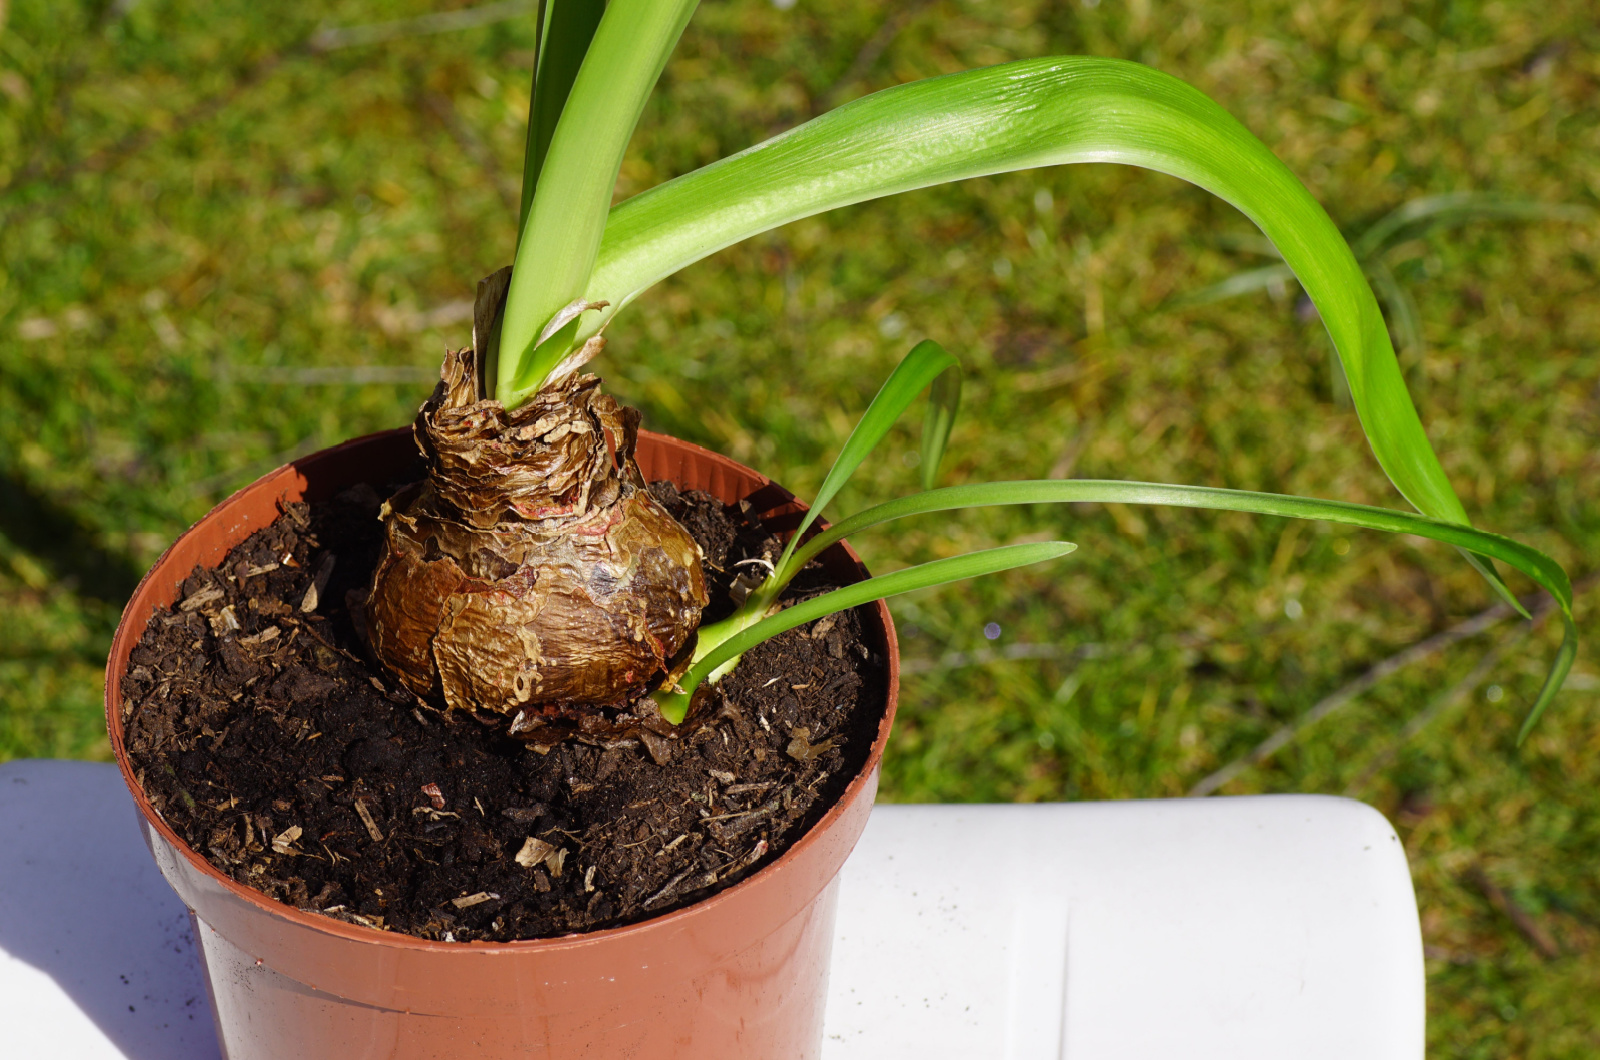 Mature amaryllis bulb with two side bulbs in a pot